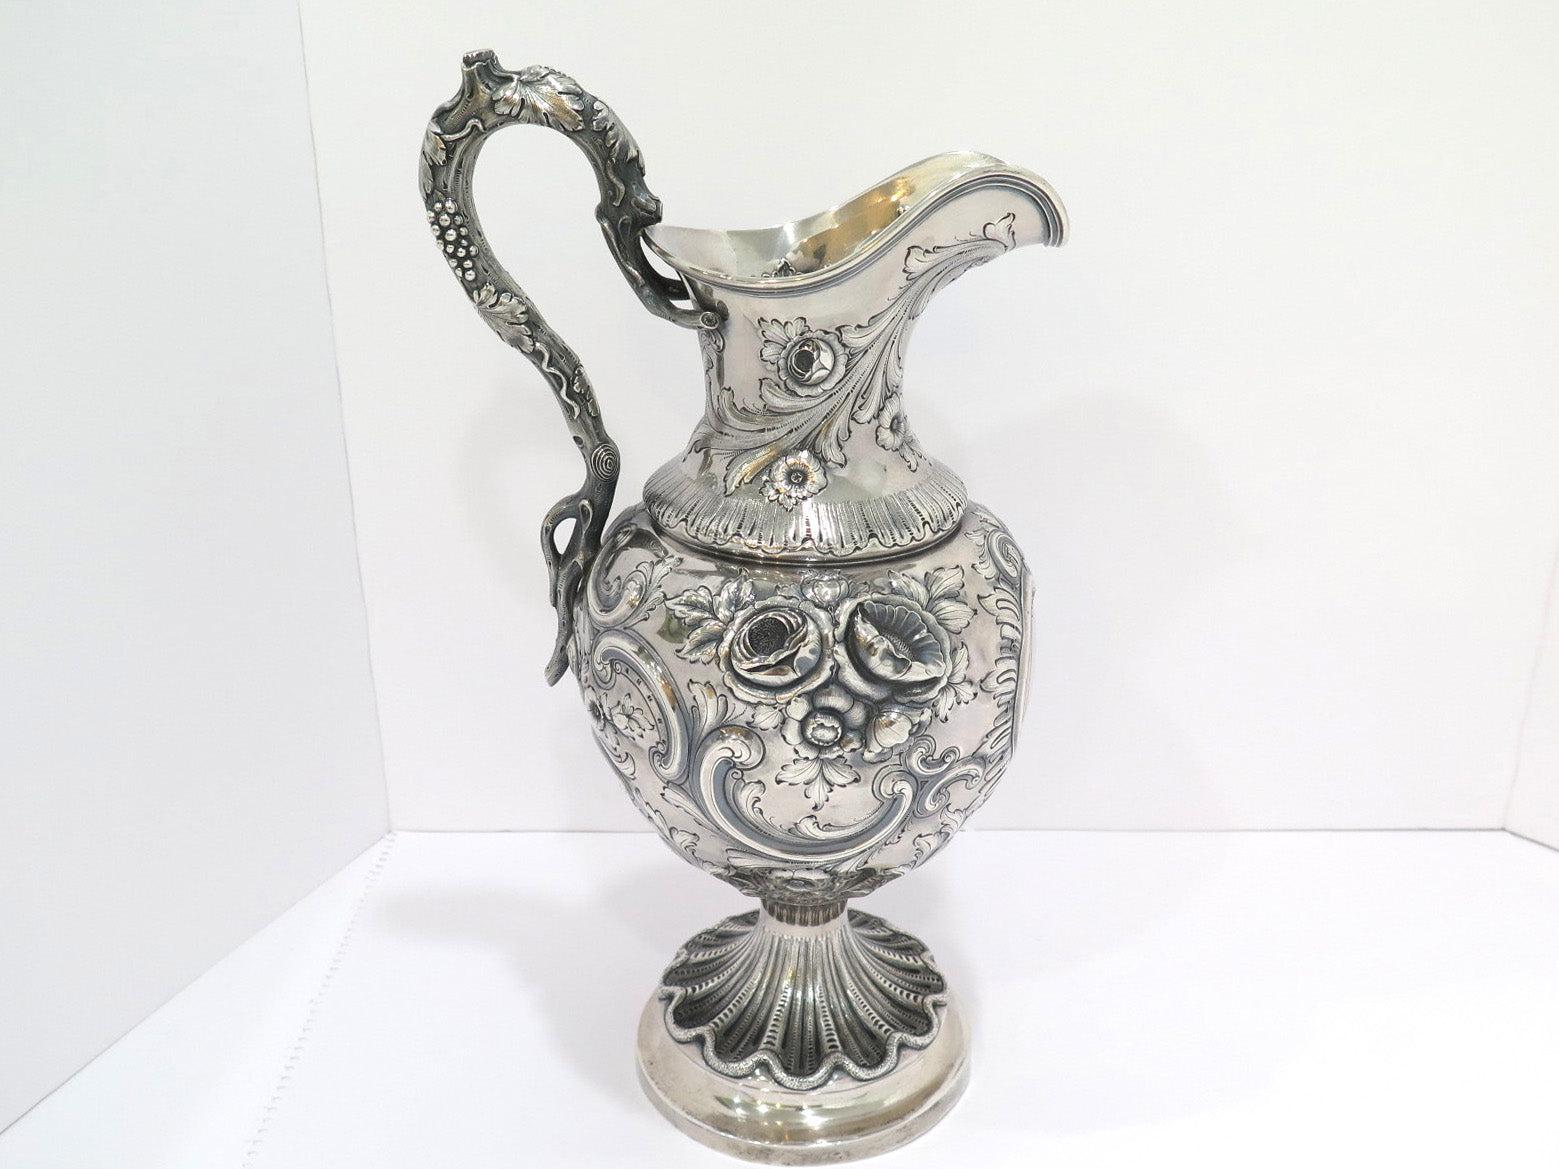 American Coin Silver Bailey Antique c. 1840 Floral Repousse Grapevine Handle Pitcher For Sale